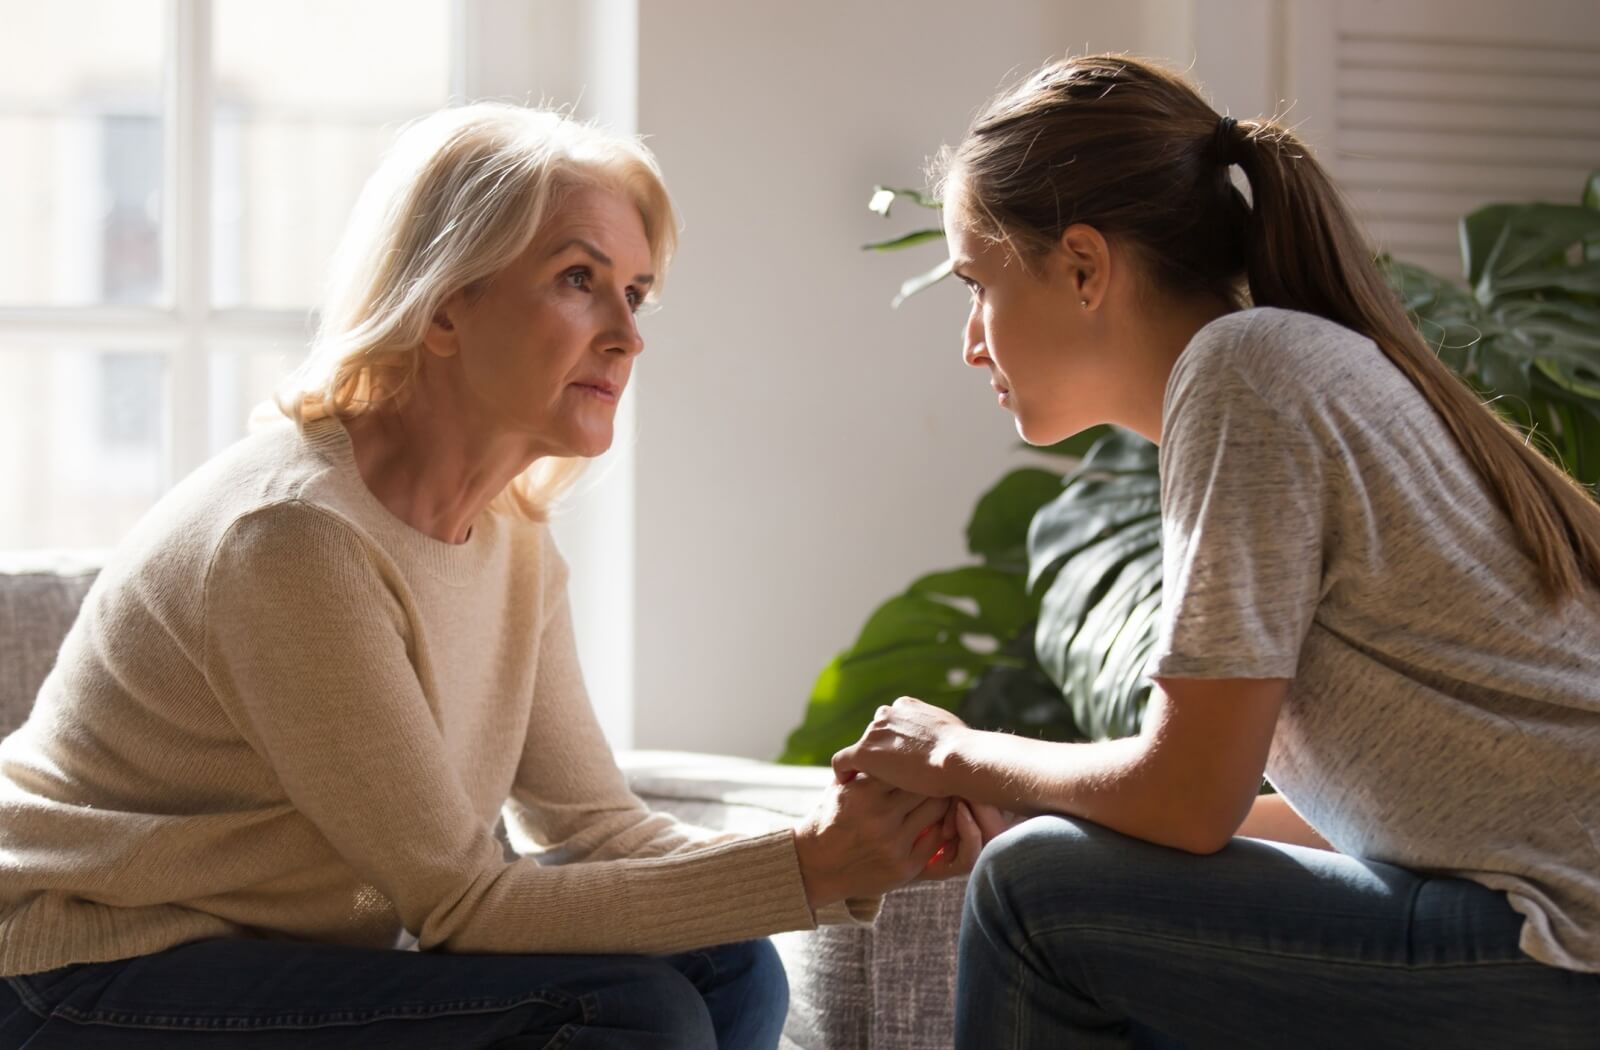 An older adult woman and her daughter having a serious conversation with each other in a sunlit room